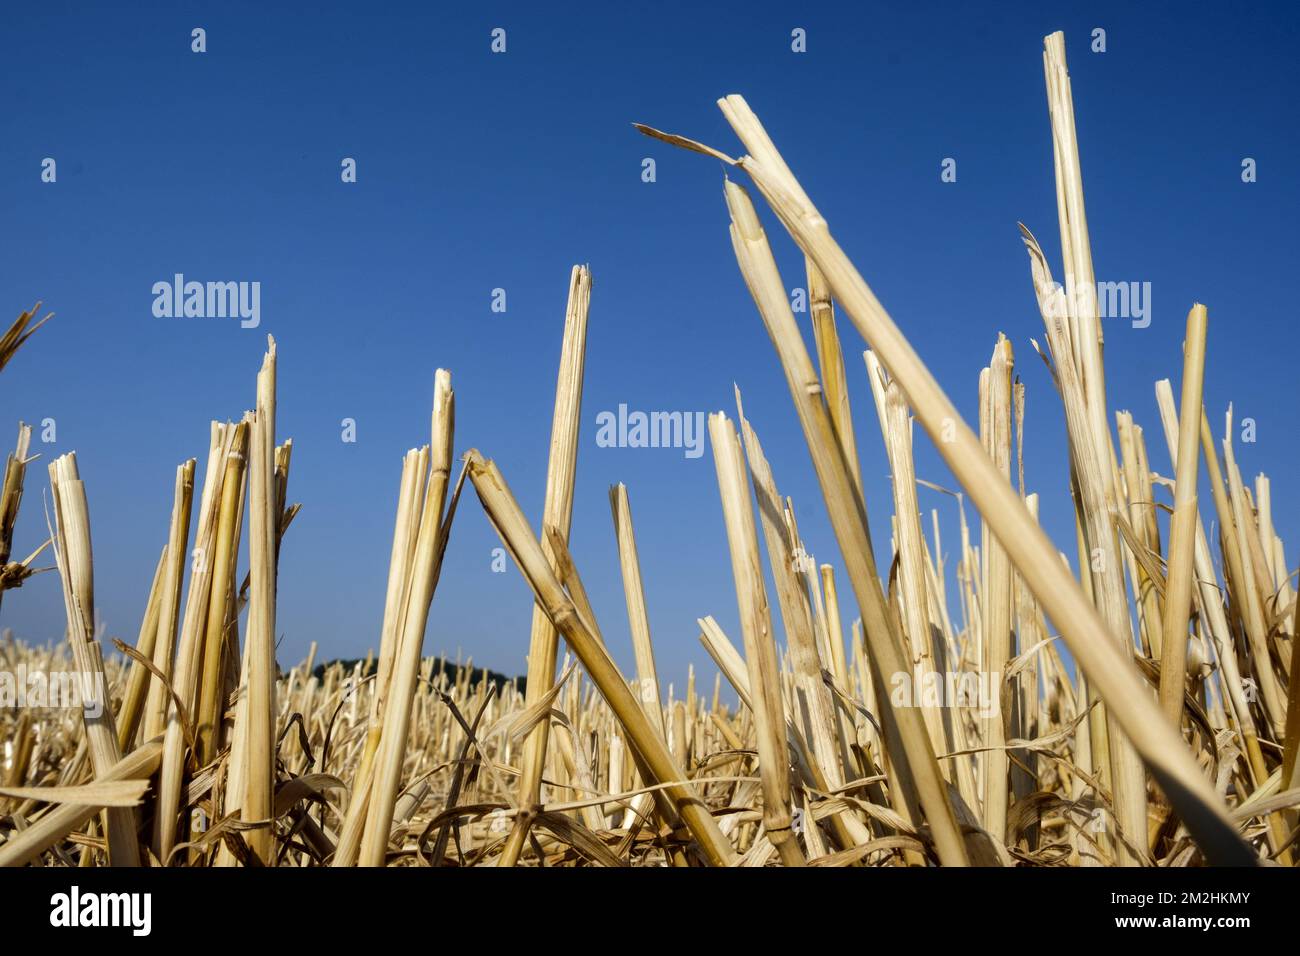 Because of the heat wave, the wheat are cutted very soon in the season and the hay are collected | Les bles sont coupes tres tot dans la saison cette anne. La paille a ete recoltee en avance. 05/08/2018 Stock Photo